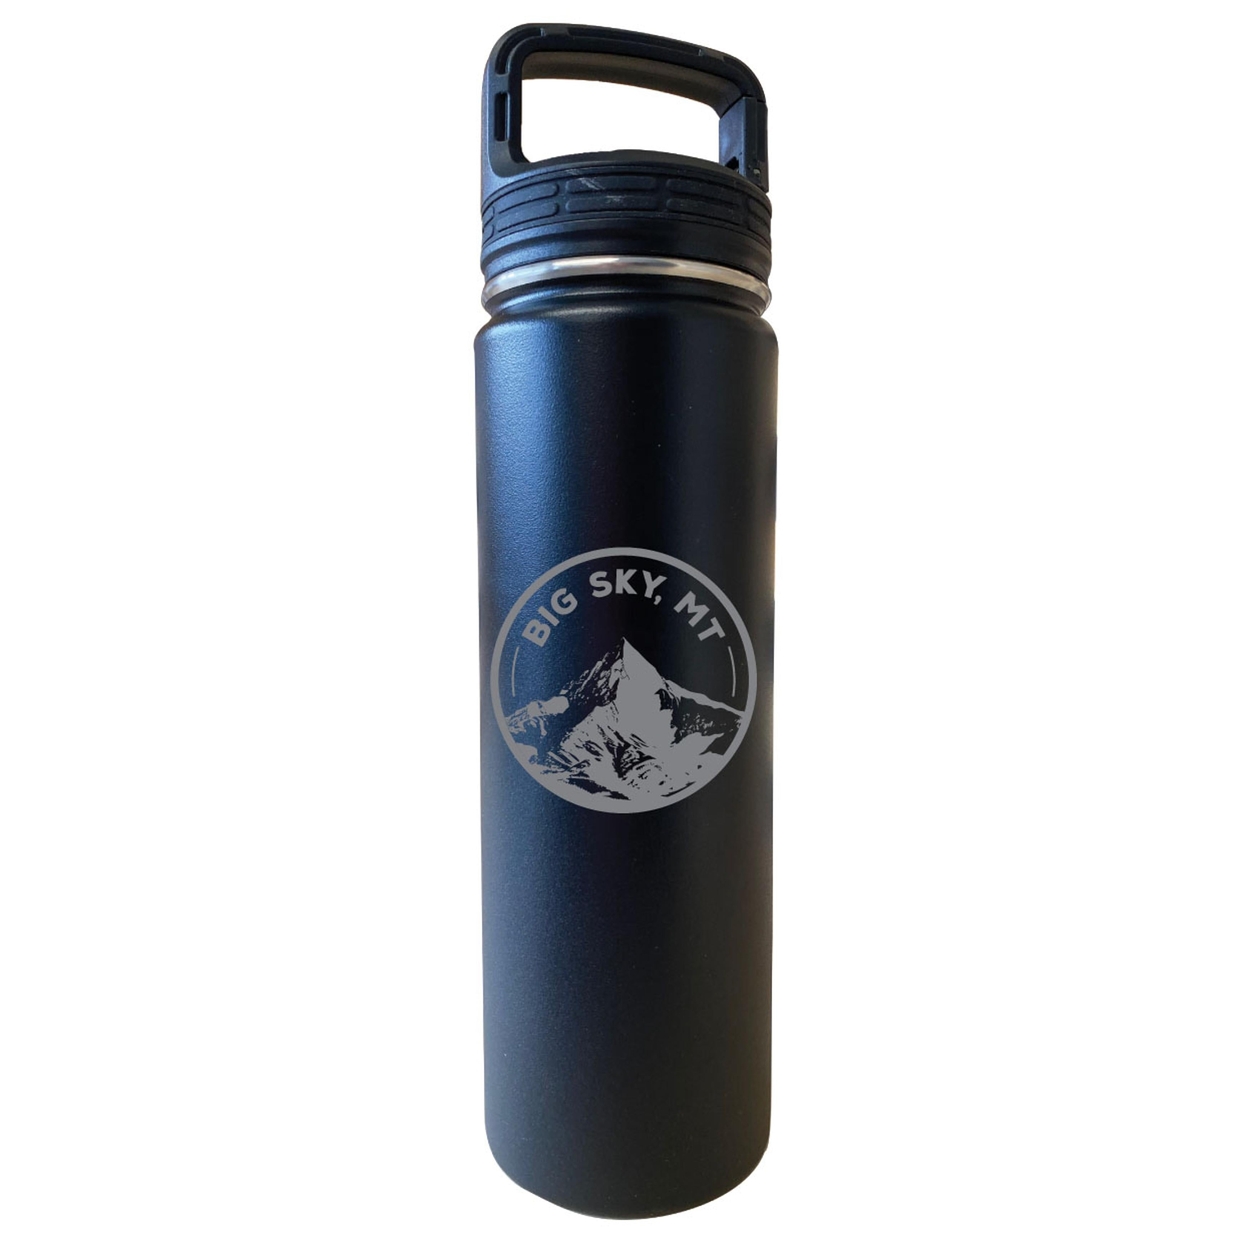 Big Sky Montana Souvenir 32 Oz Engraved Insulated Stainless Steel Tumbler - Black,,4-Pack